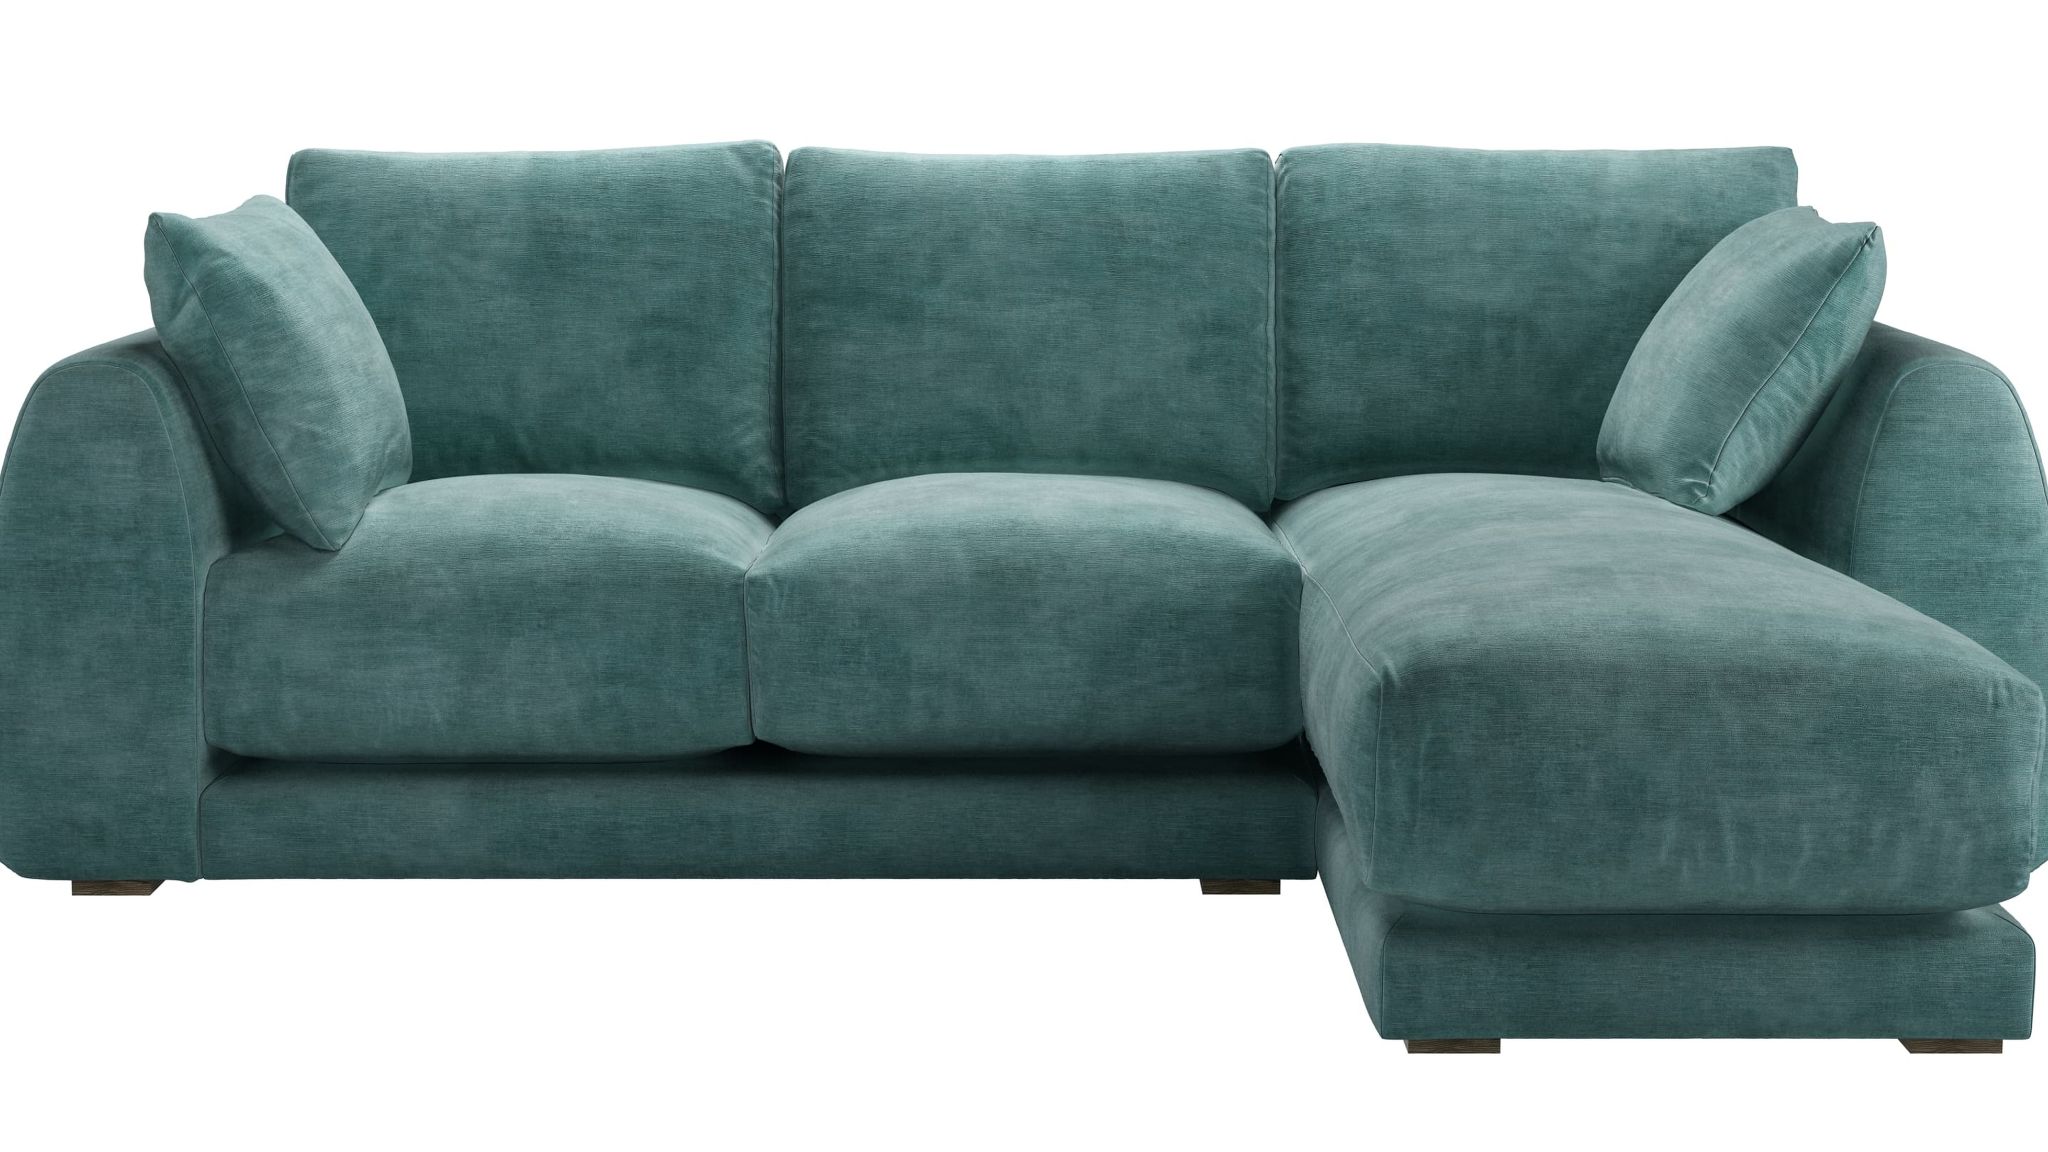 seating furniture, Sofa.com Introduces SS23 Collection for a Trade Audience